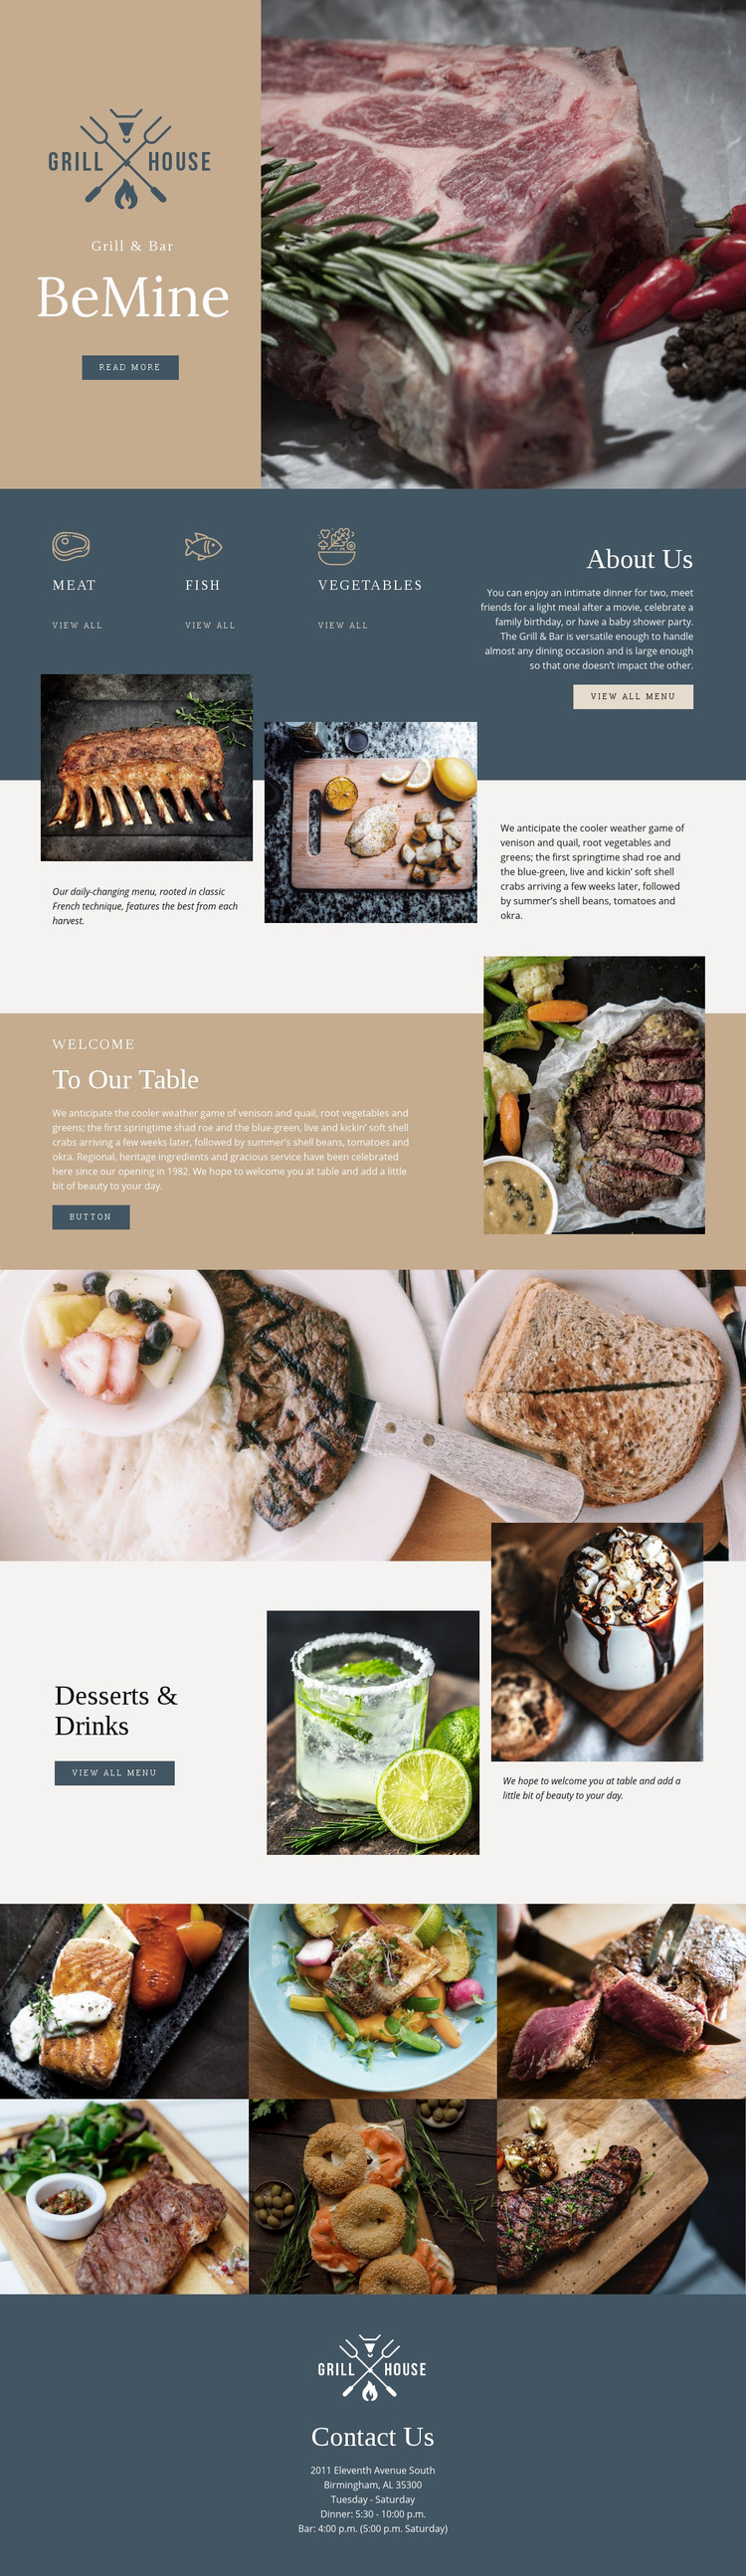 Finest grill house restaurant Web Page Design